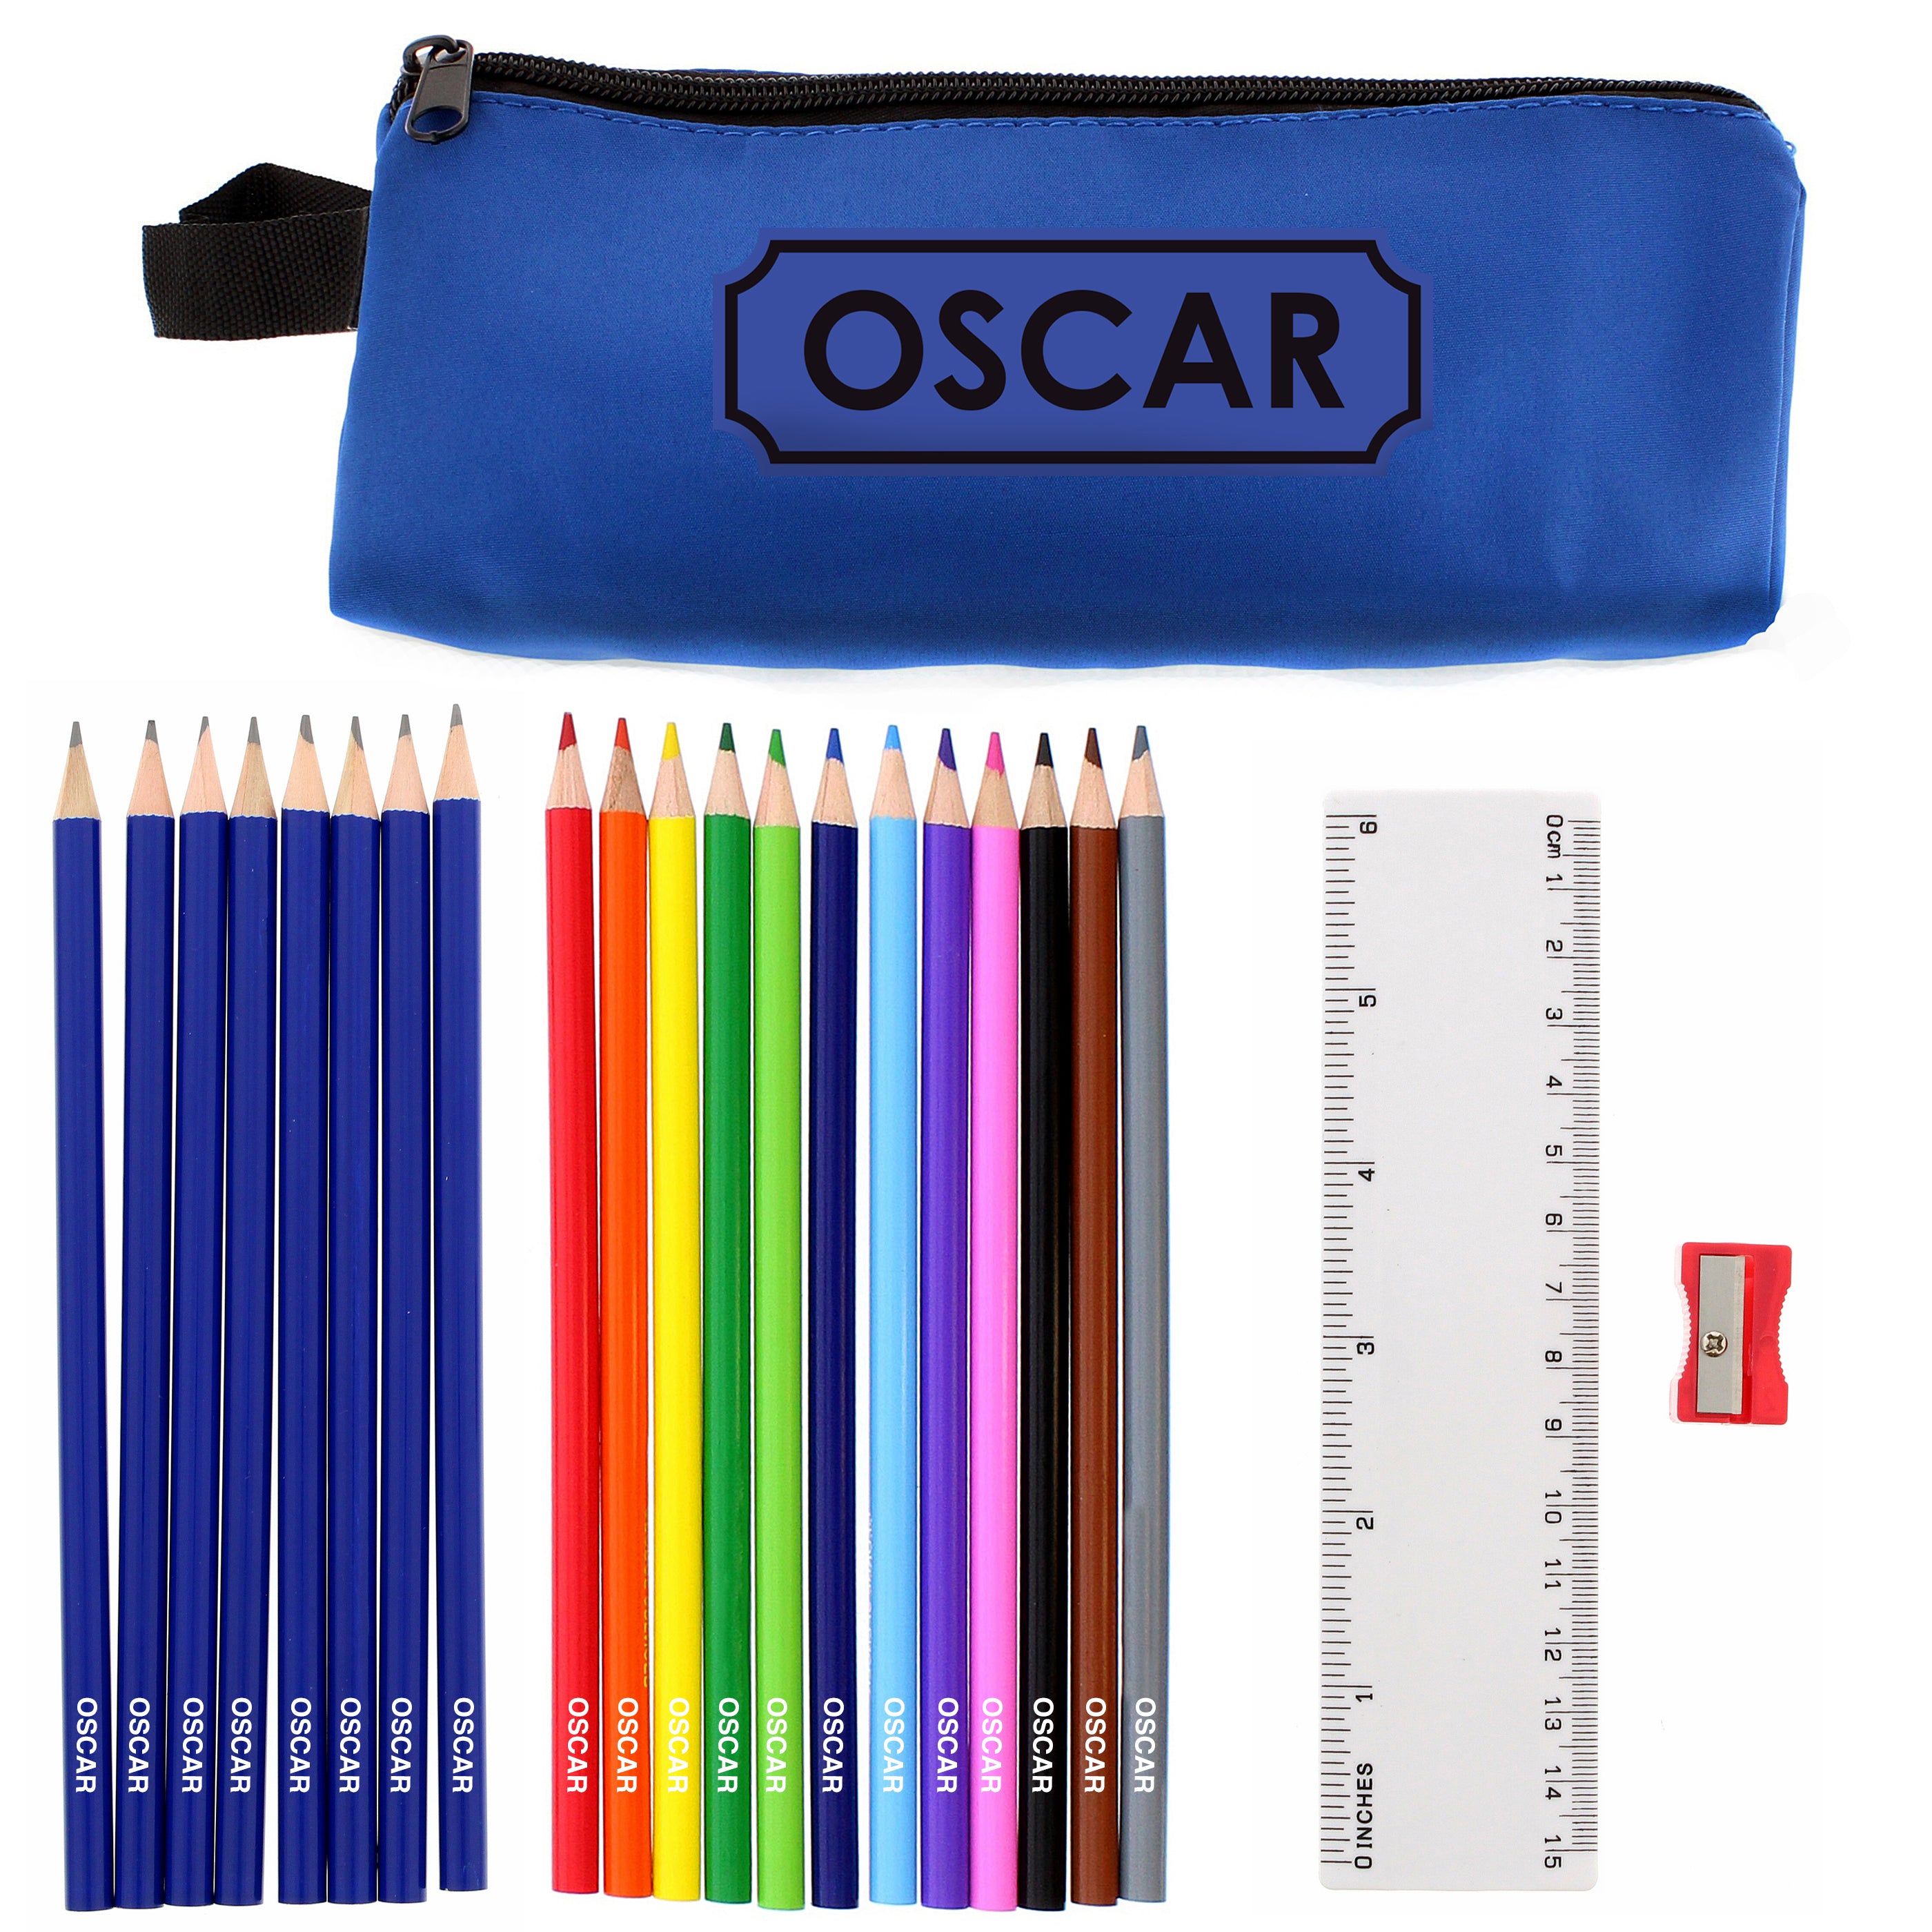 Blue Pencil Case with Personalised Pencils